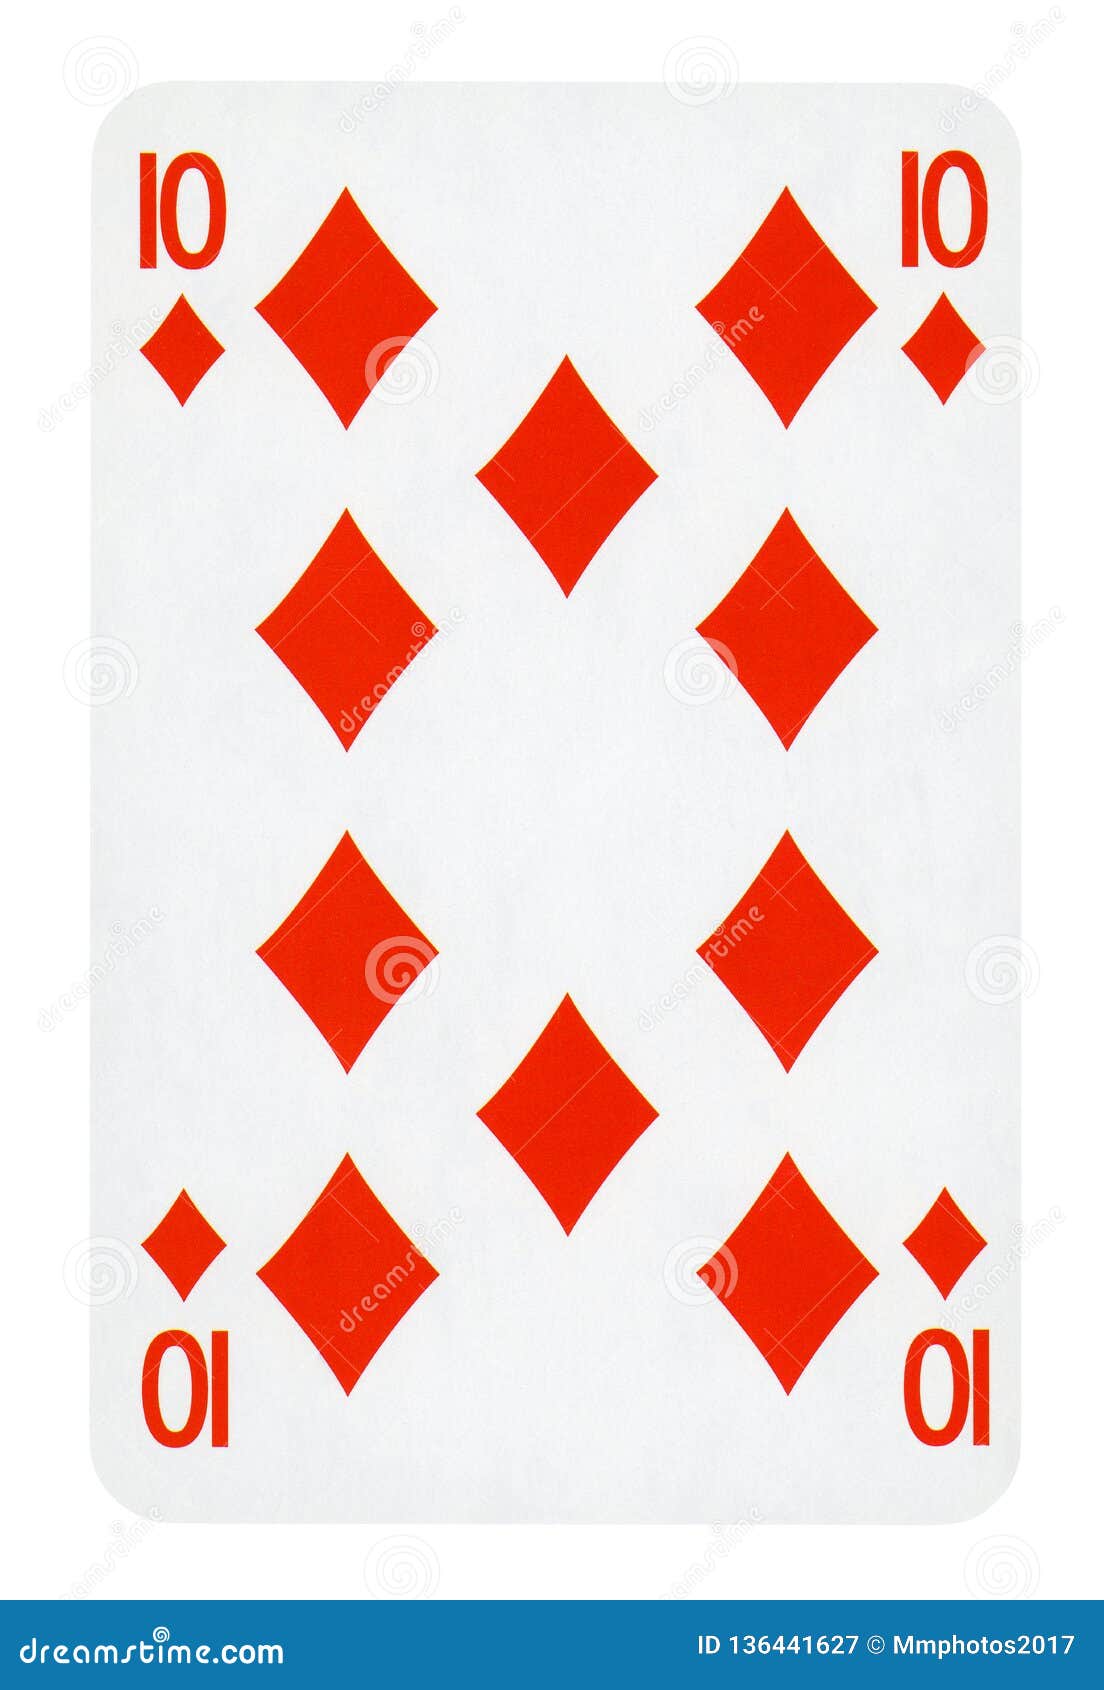 ten-of-diamonds-playing-card-unique-hand-drawn-pocker-card-one-of-52